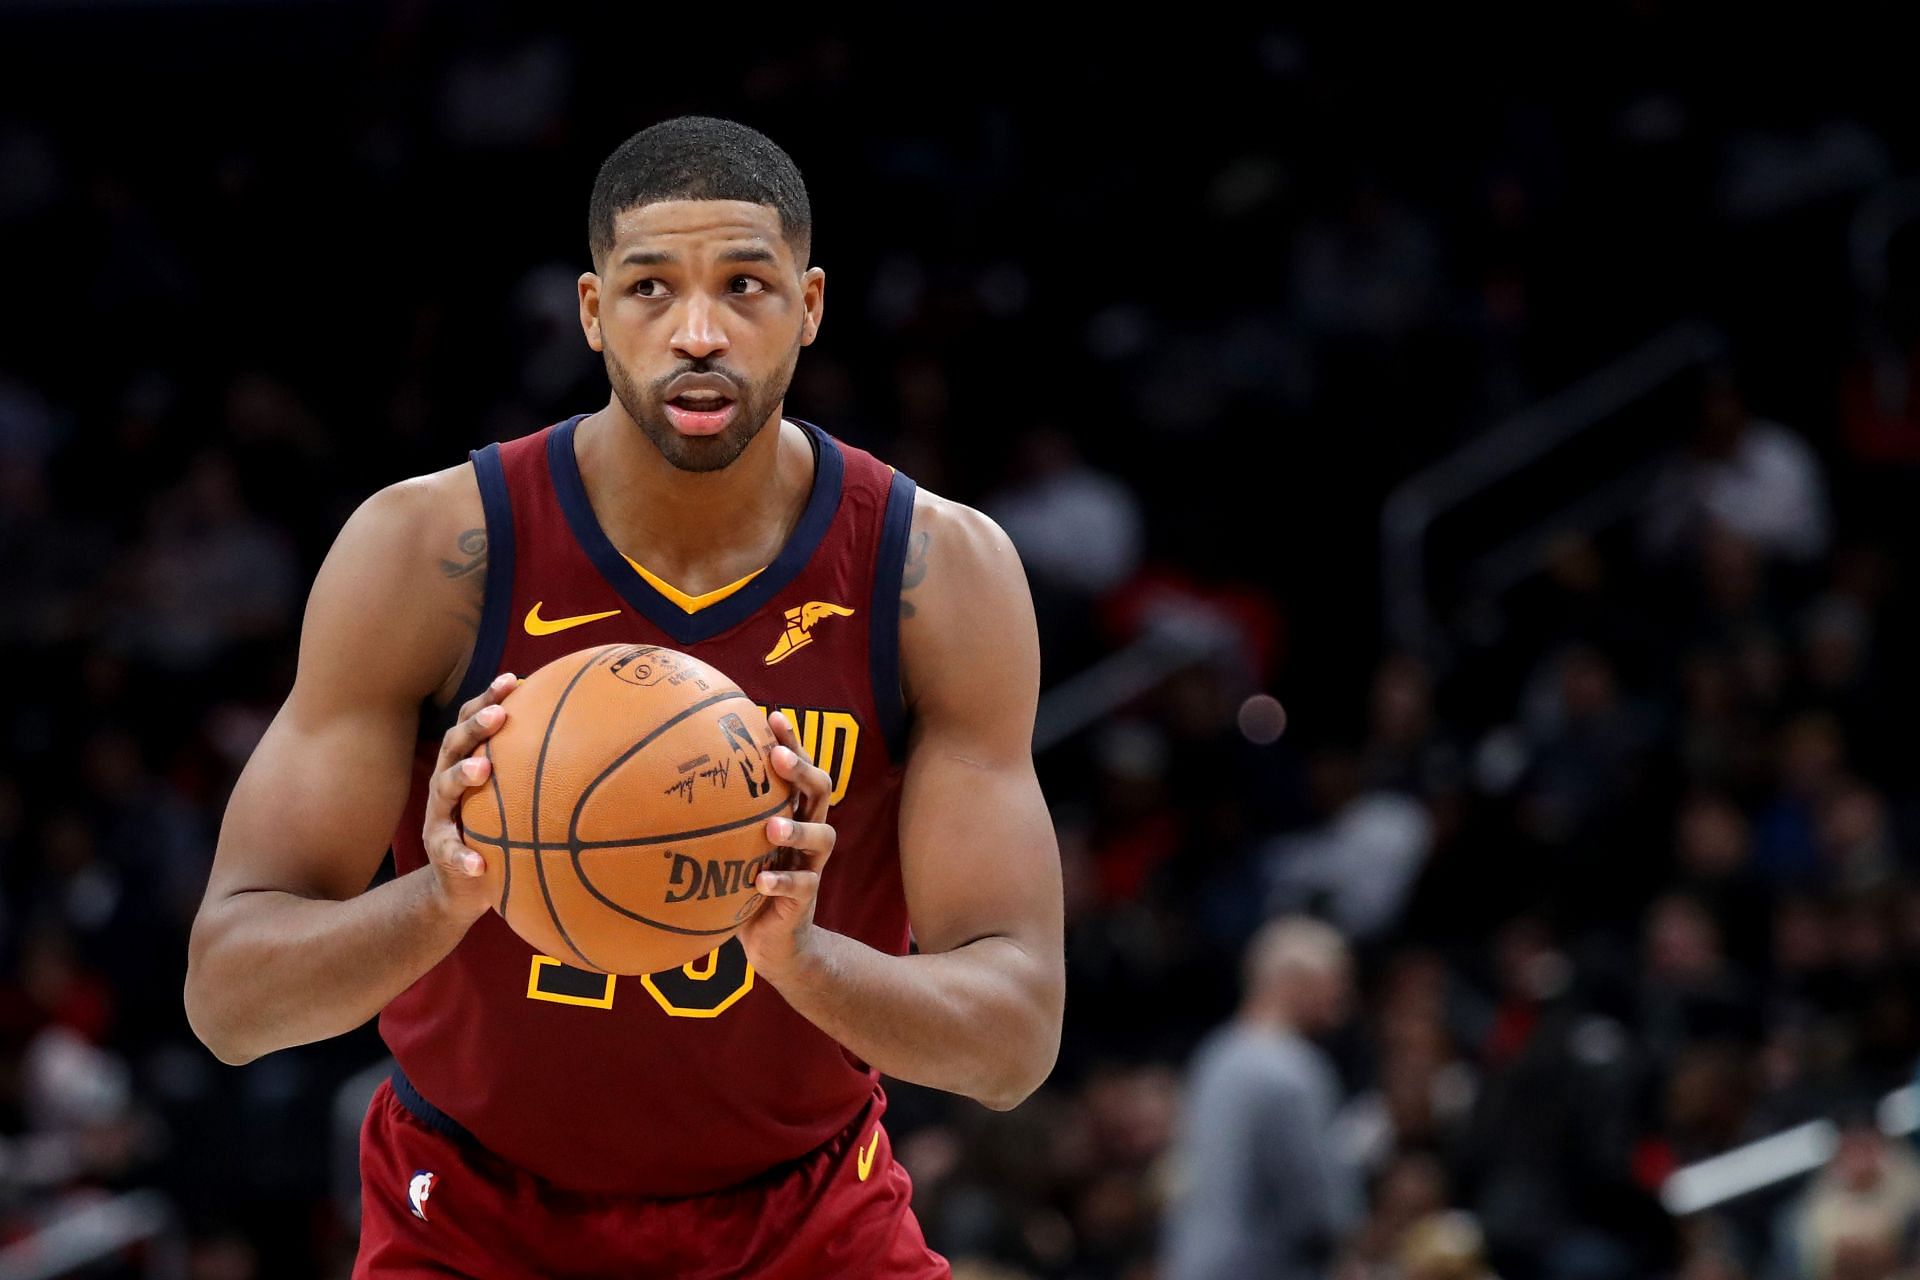 Tristan Thompson may have another baby (Image via Getty Images)